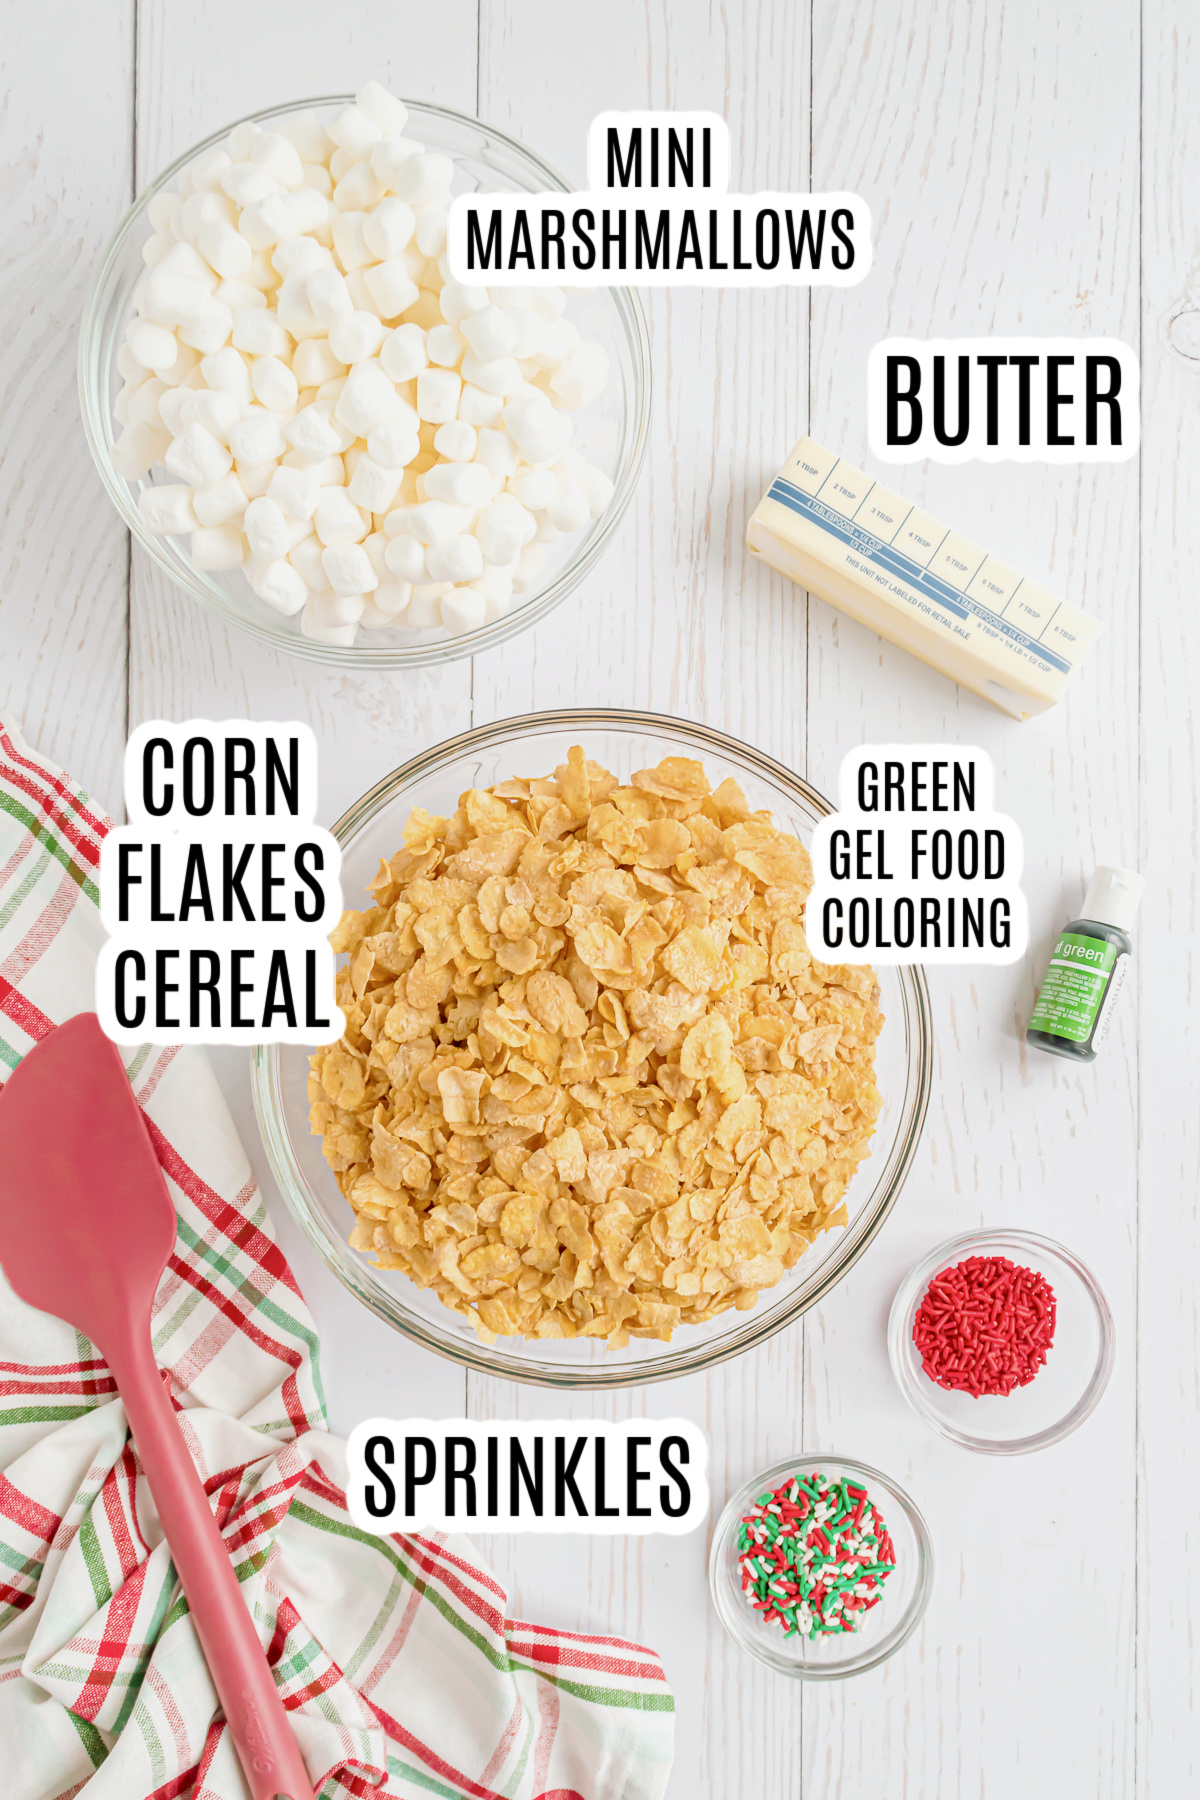 All of the ingredients needed to make the Christmas wreath cookie recipe including butter, mini marshmallows, corn flakes cereal, green food coloring and sprinkles.